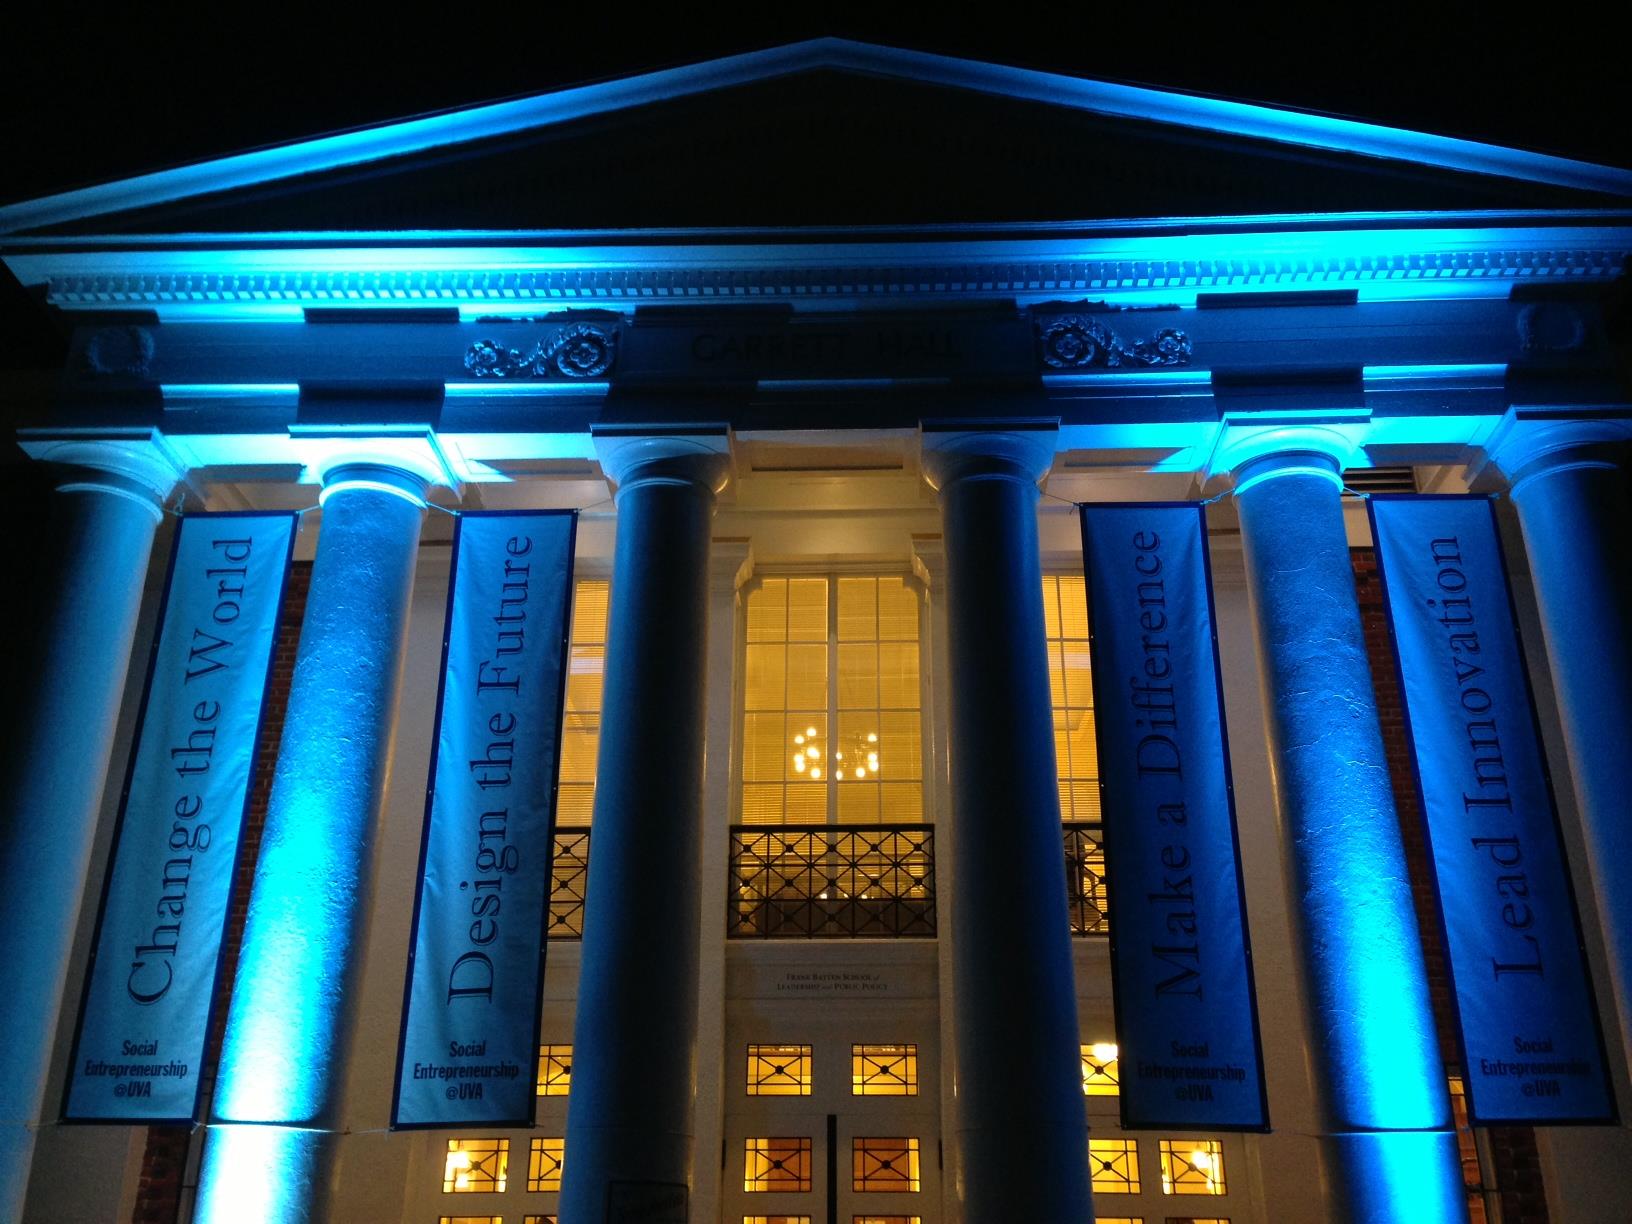 Data Science institute at night with blue lights shining on the pillars